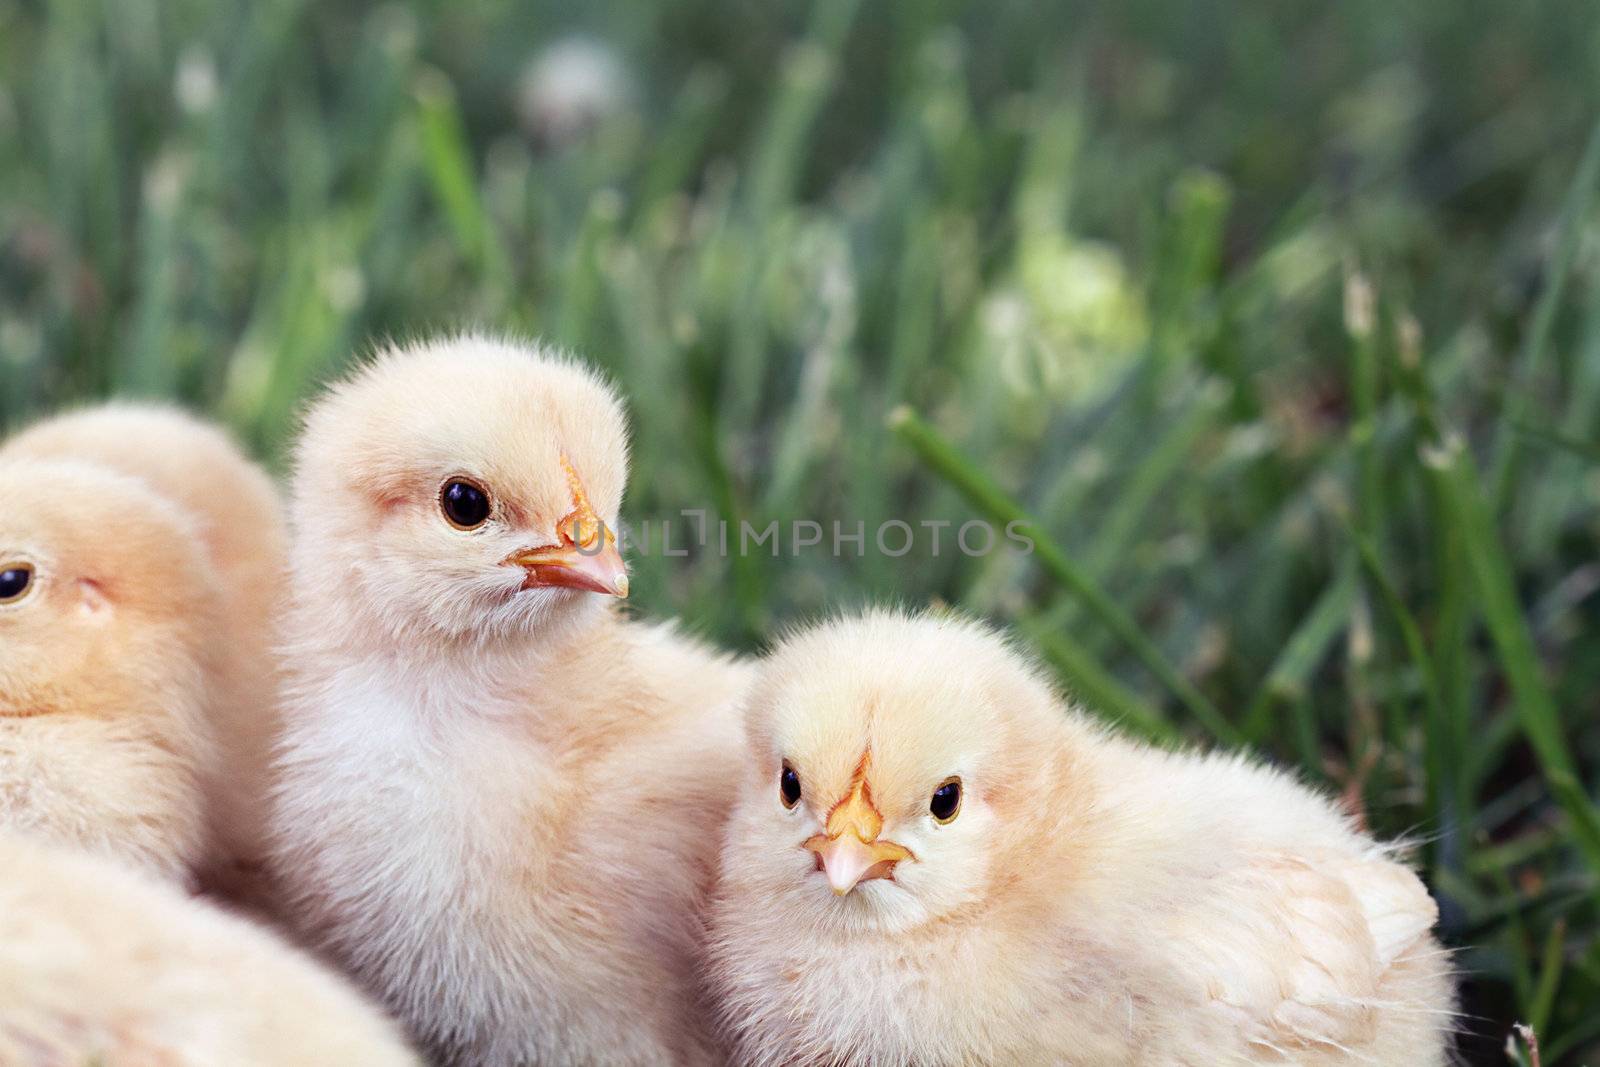 Little Buff Orpington chicks sitting huddled together in the grass. Extreme shallow depth of field. 